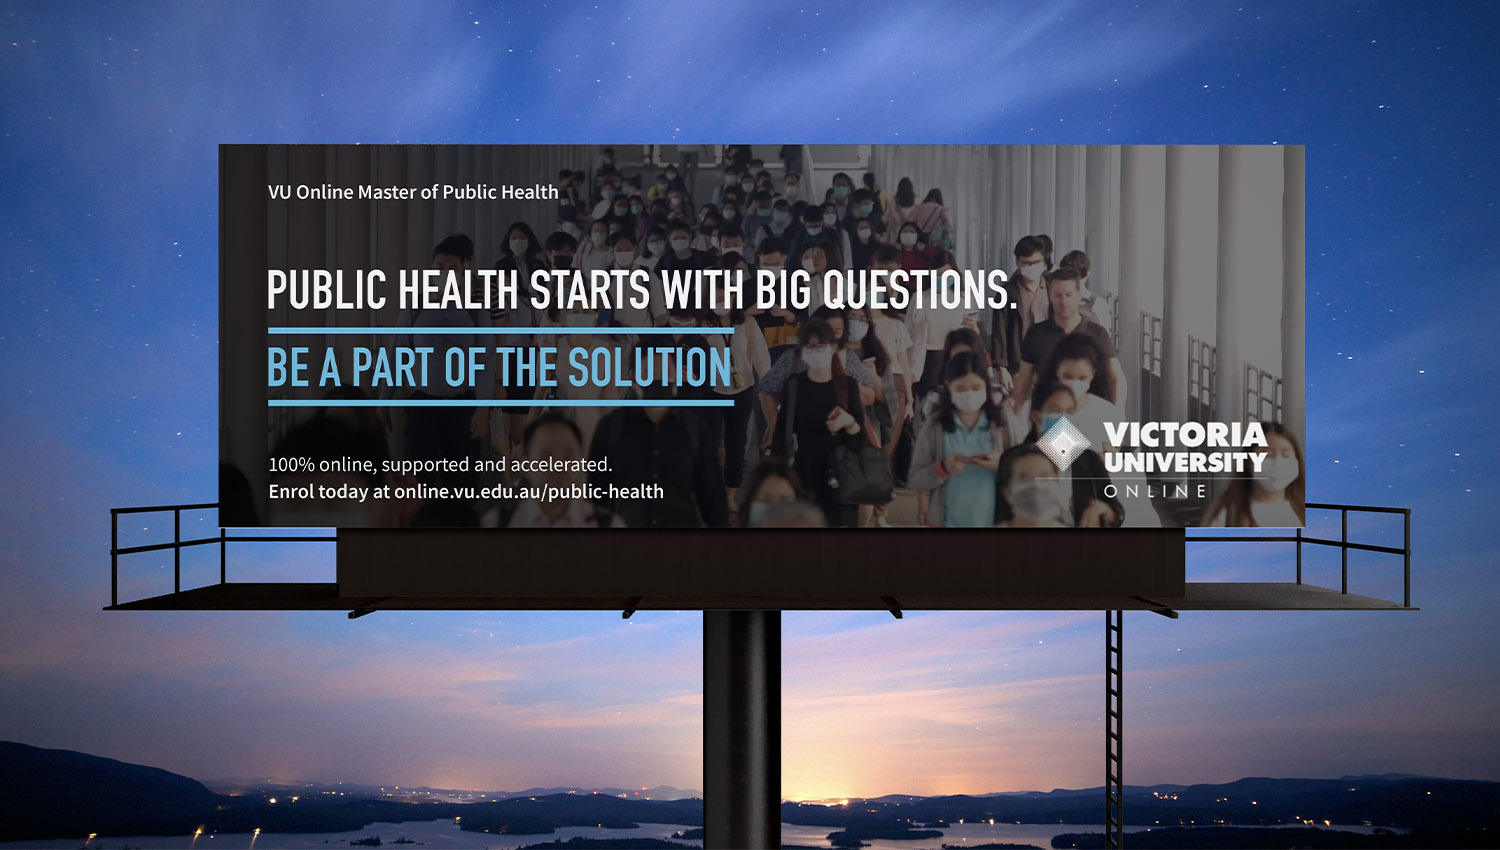 VU Online Master of Public Health billboard with the headline: "Public Health Starts with Big Questions. Be a part of the solution."